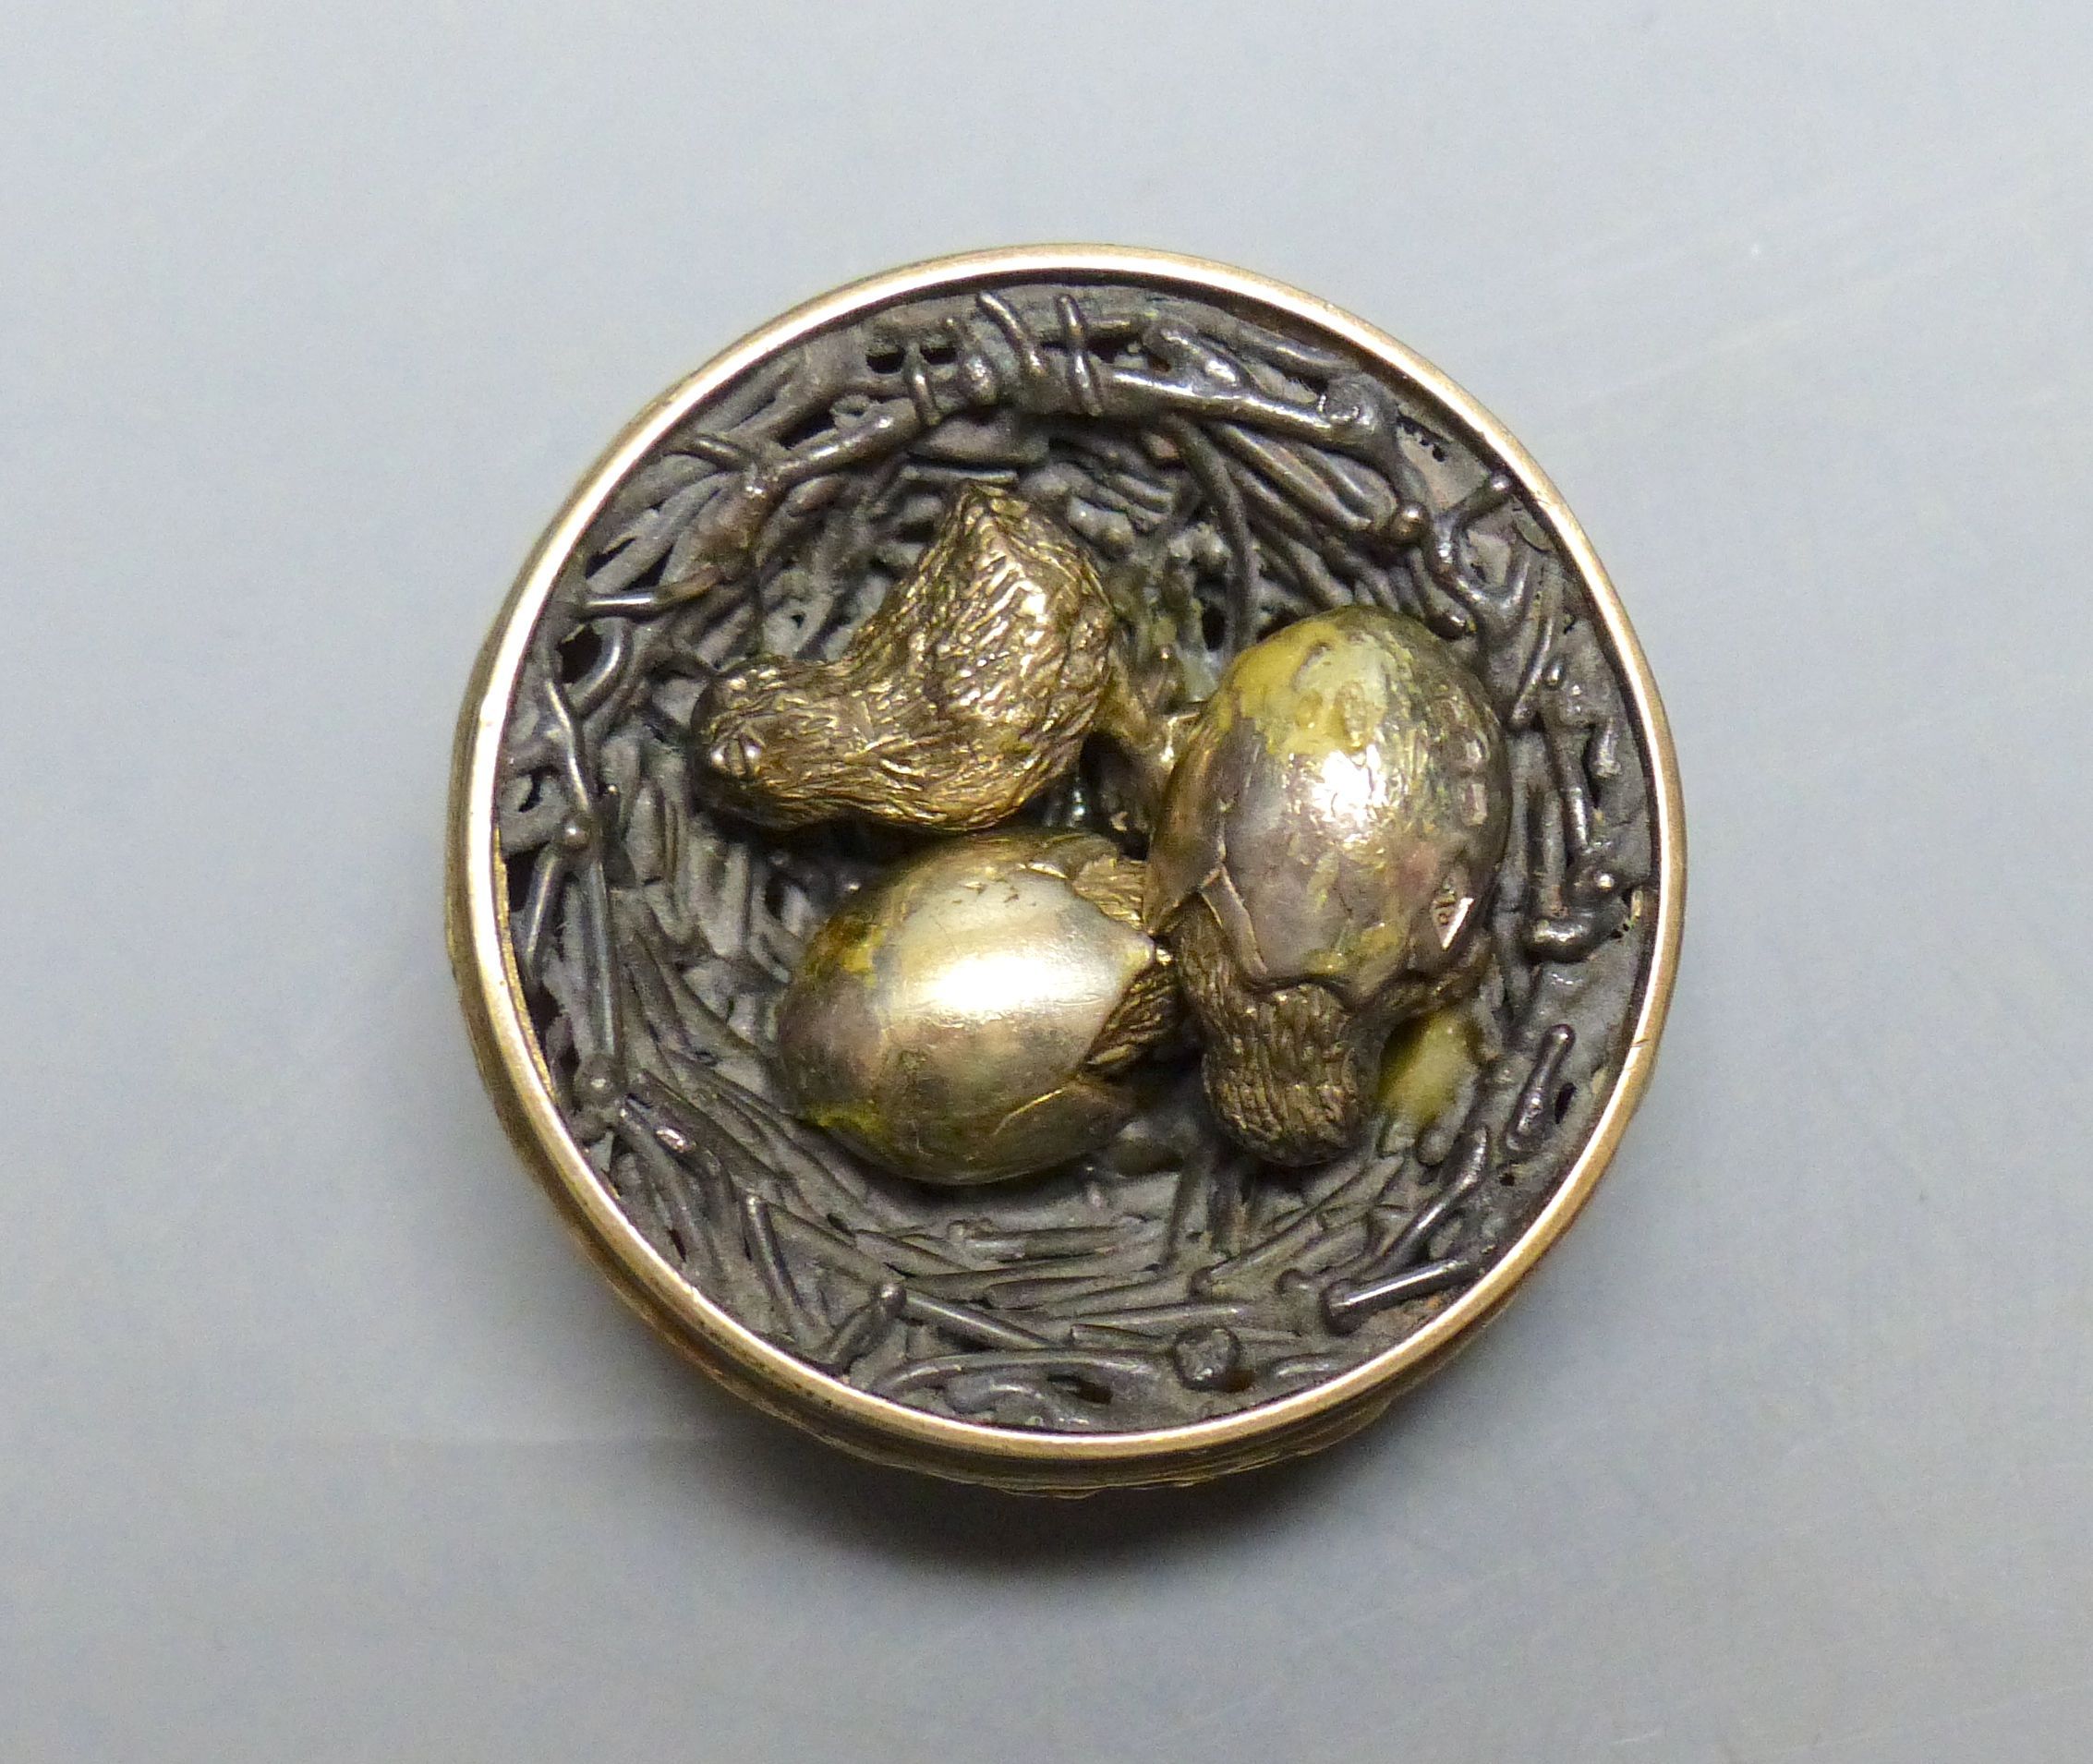 A modern silver gilt surprise egg, by Richard Lawrence Geere, London, 1975, on stand & a model of a fighting cock.